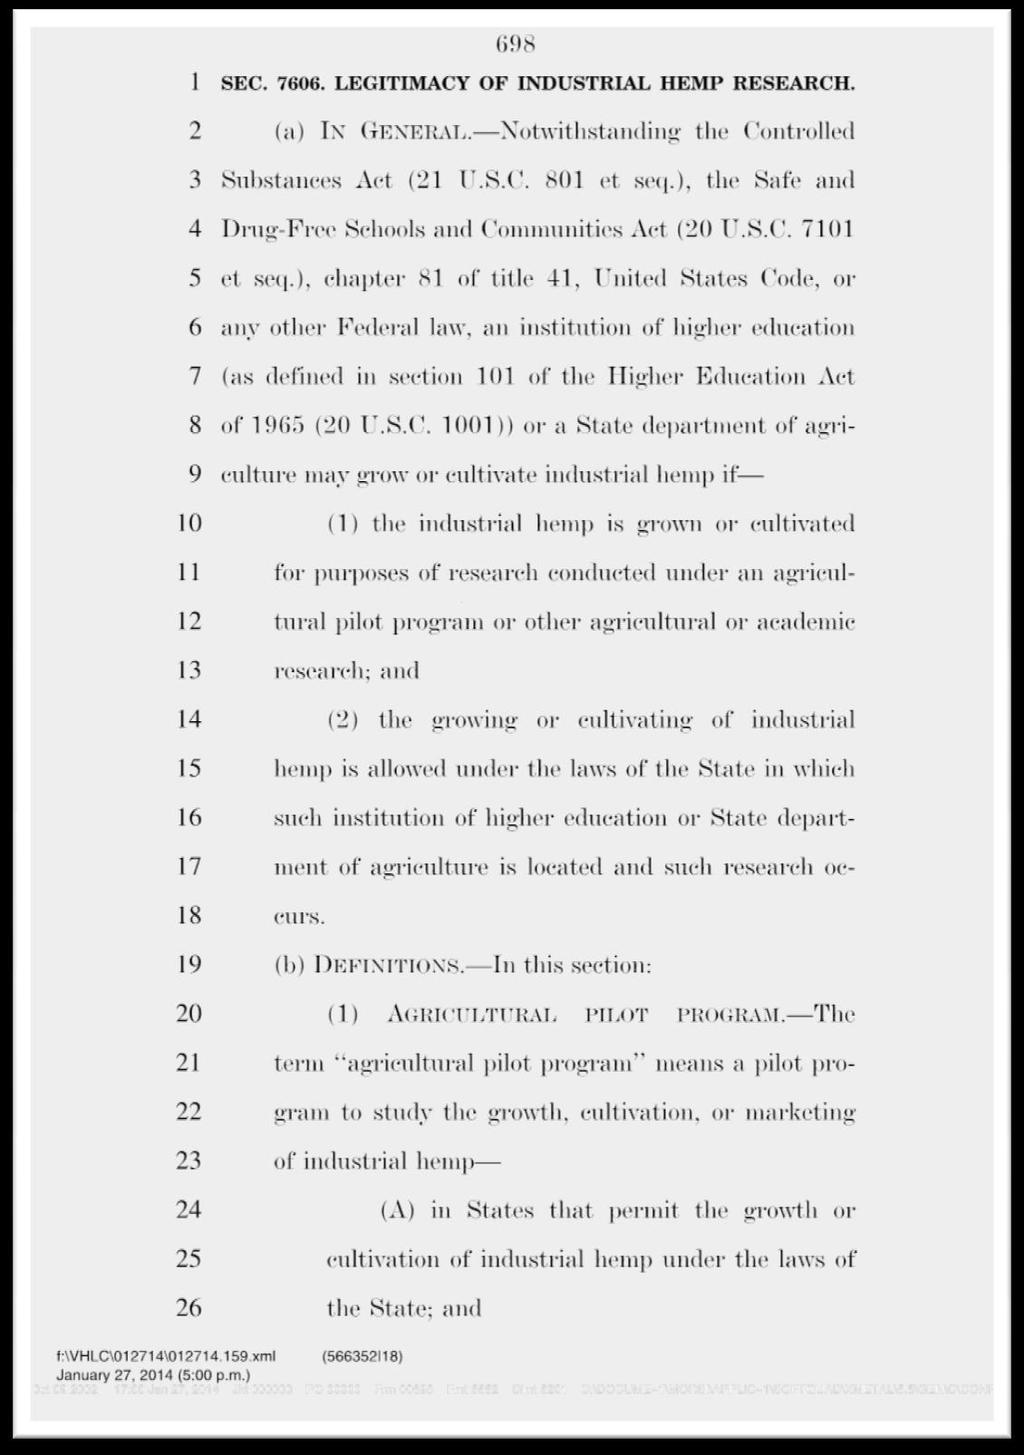 Section 7606 of Farm Bill